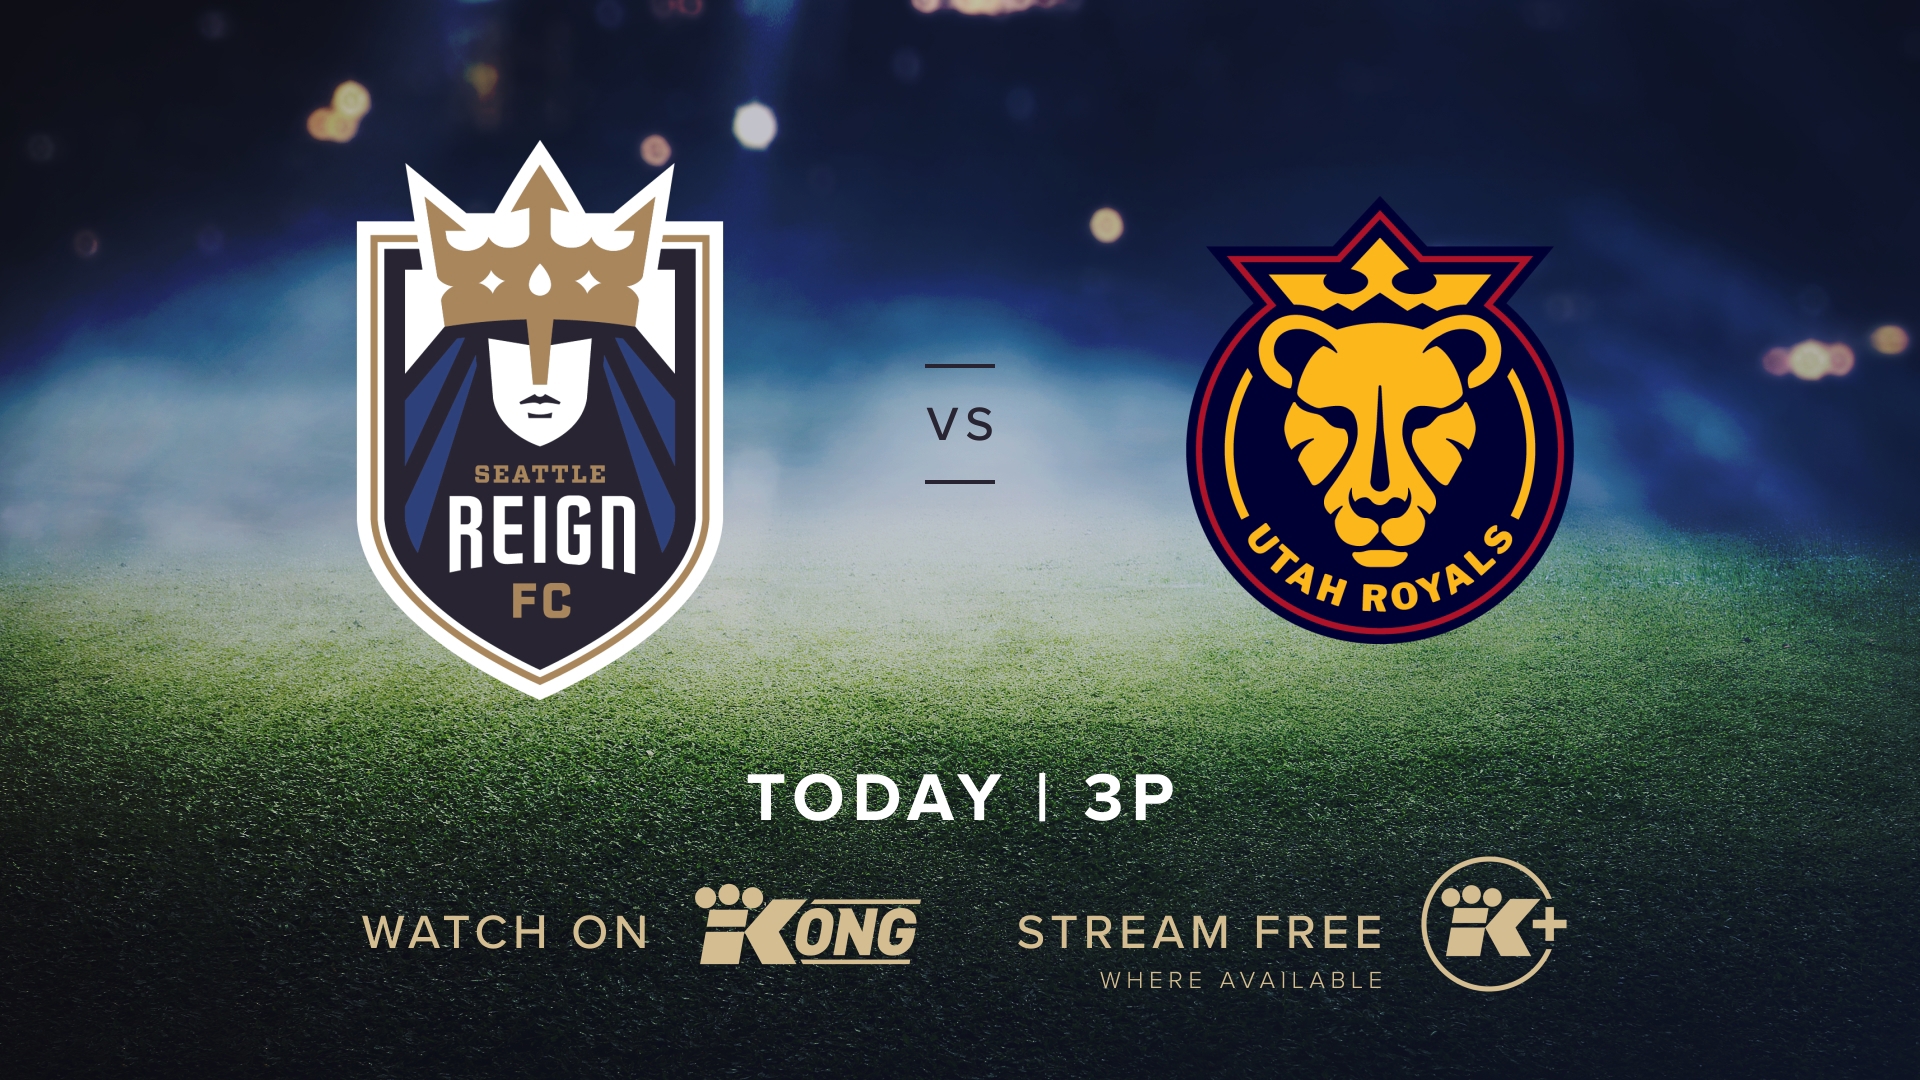 Watch the Seattle Reign FC take on the Utah Royals at home. Available to stream in the Seattle market